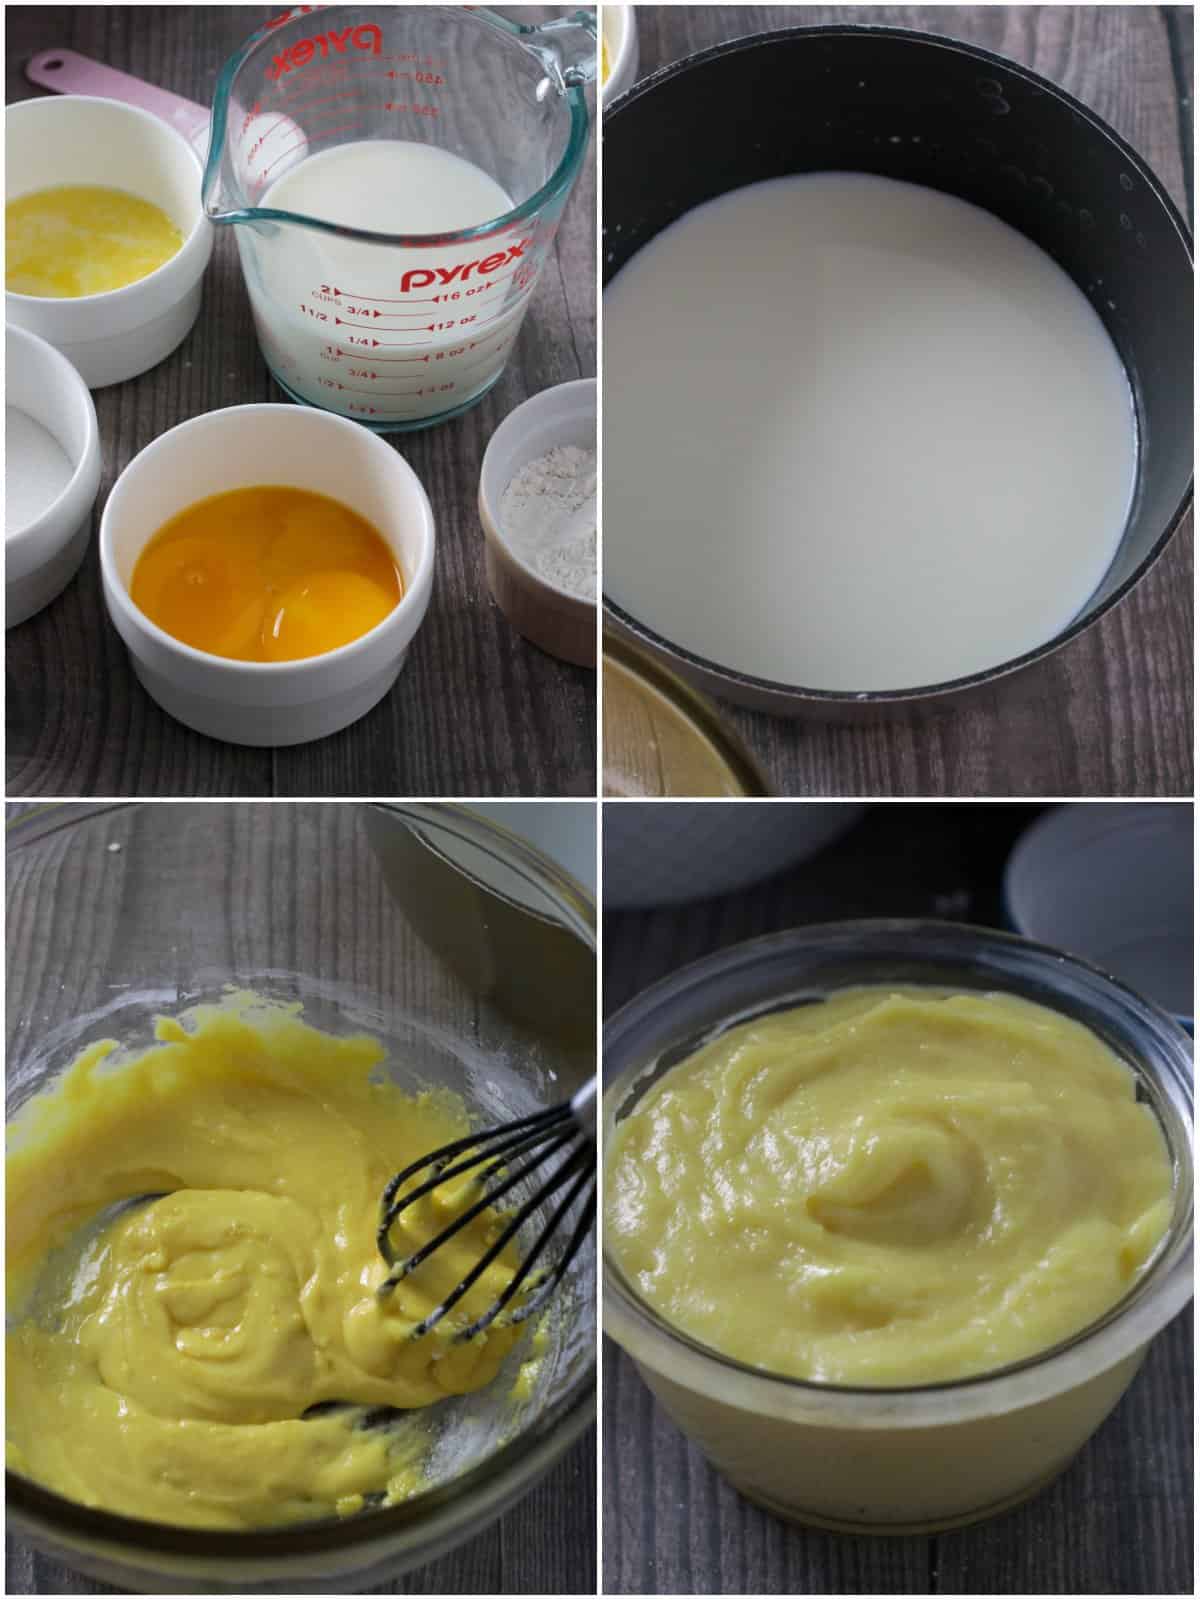 A collage showing the ingredients and process for the pastry cream.